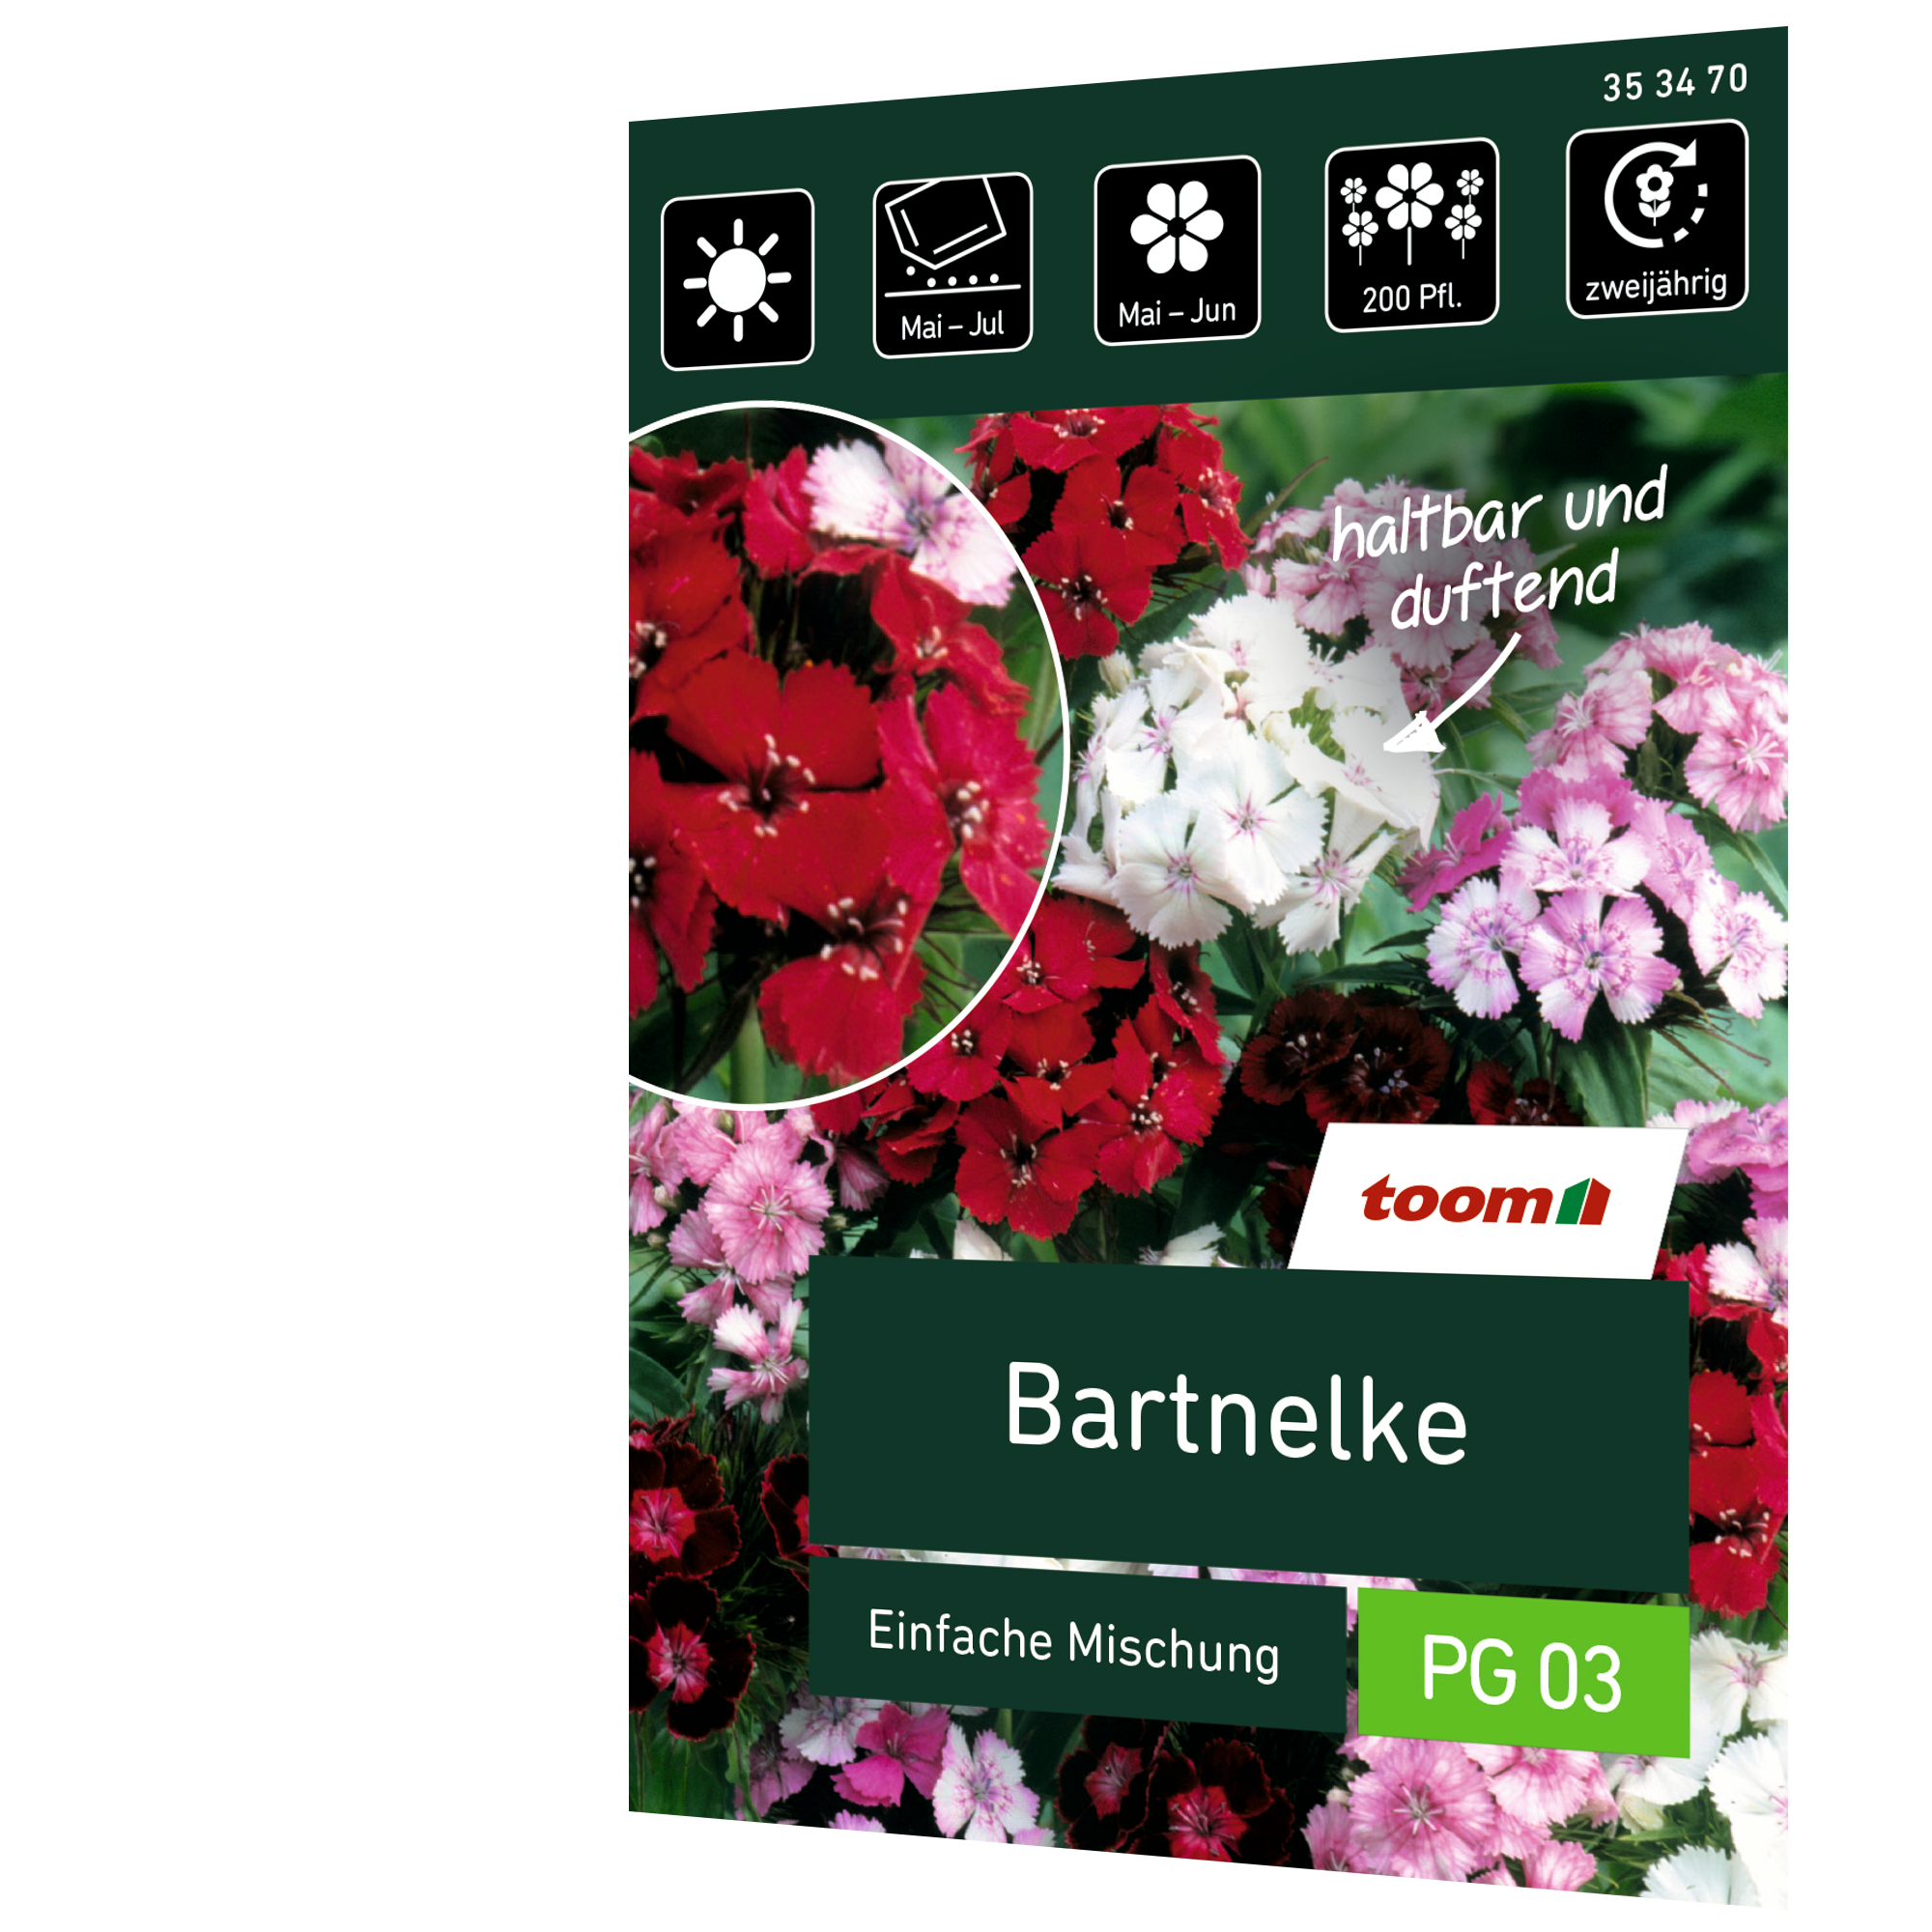 Bartnelke 'Einfache Mischung' + product picture